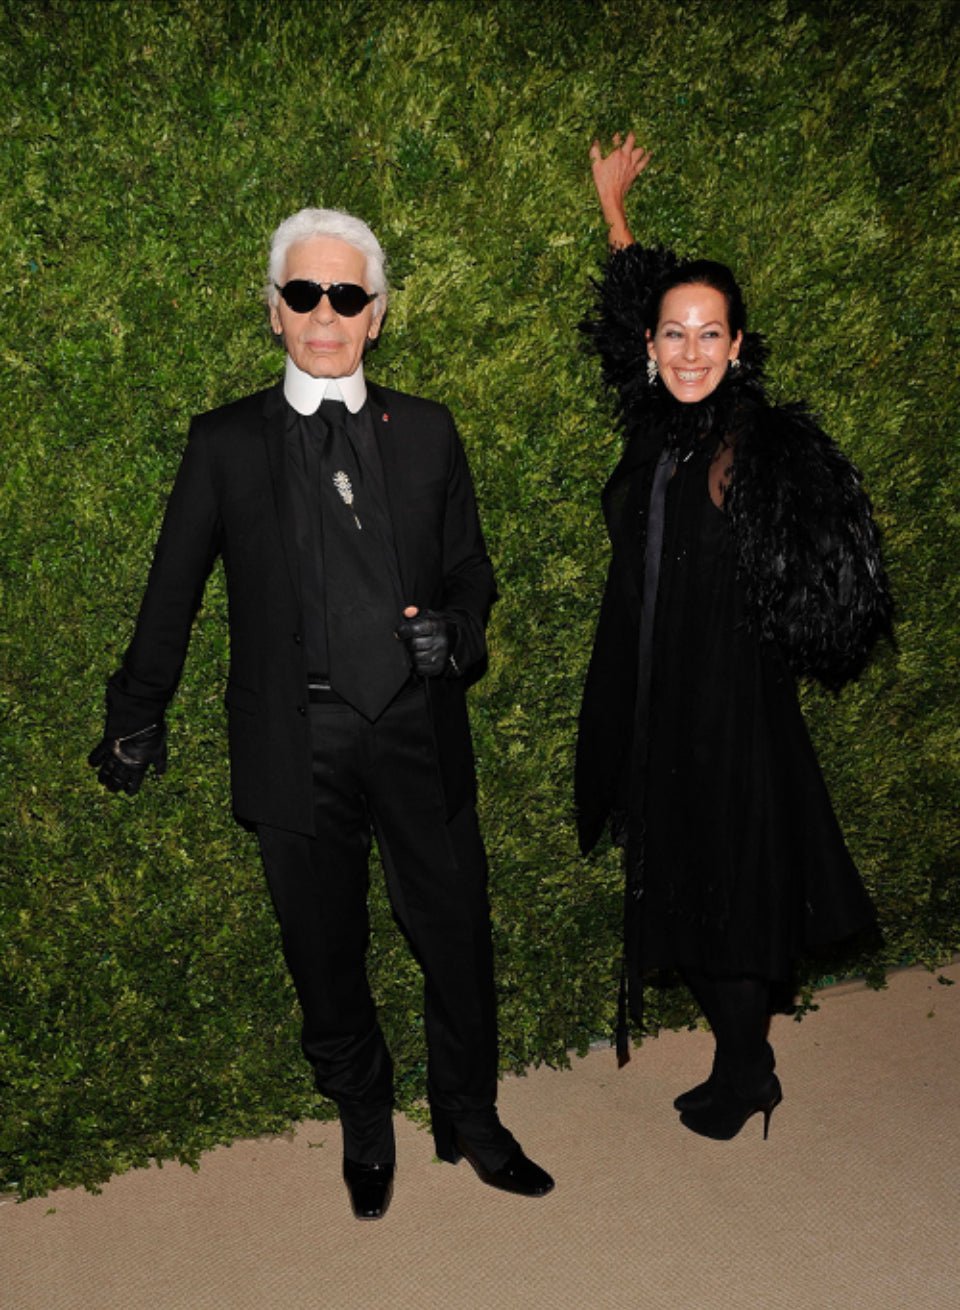 Karl Lagerfeld's Precious Belongings Auctioned For A Total Of $ 13,5 million - DSF Antique Jewelry